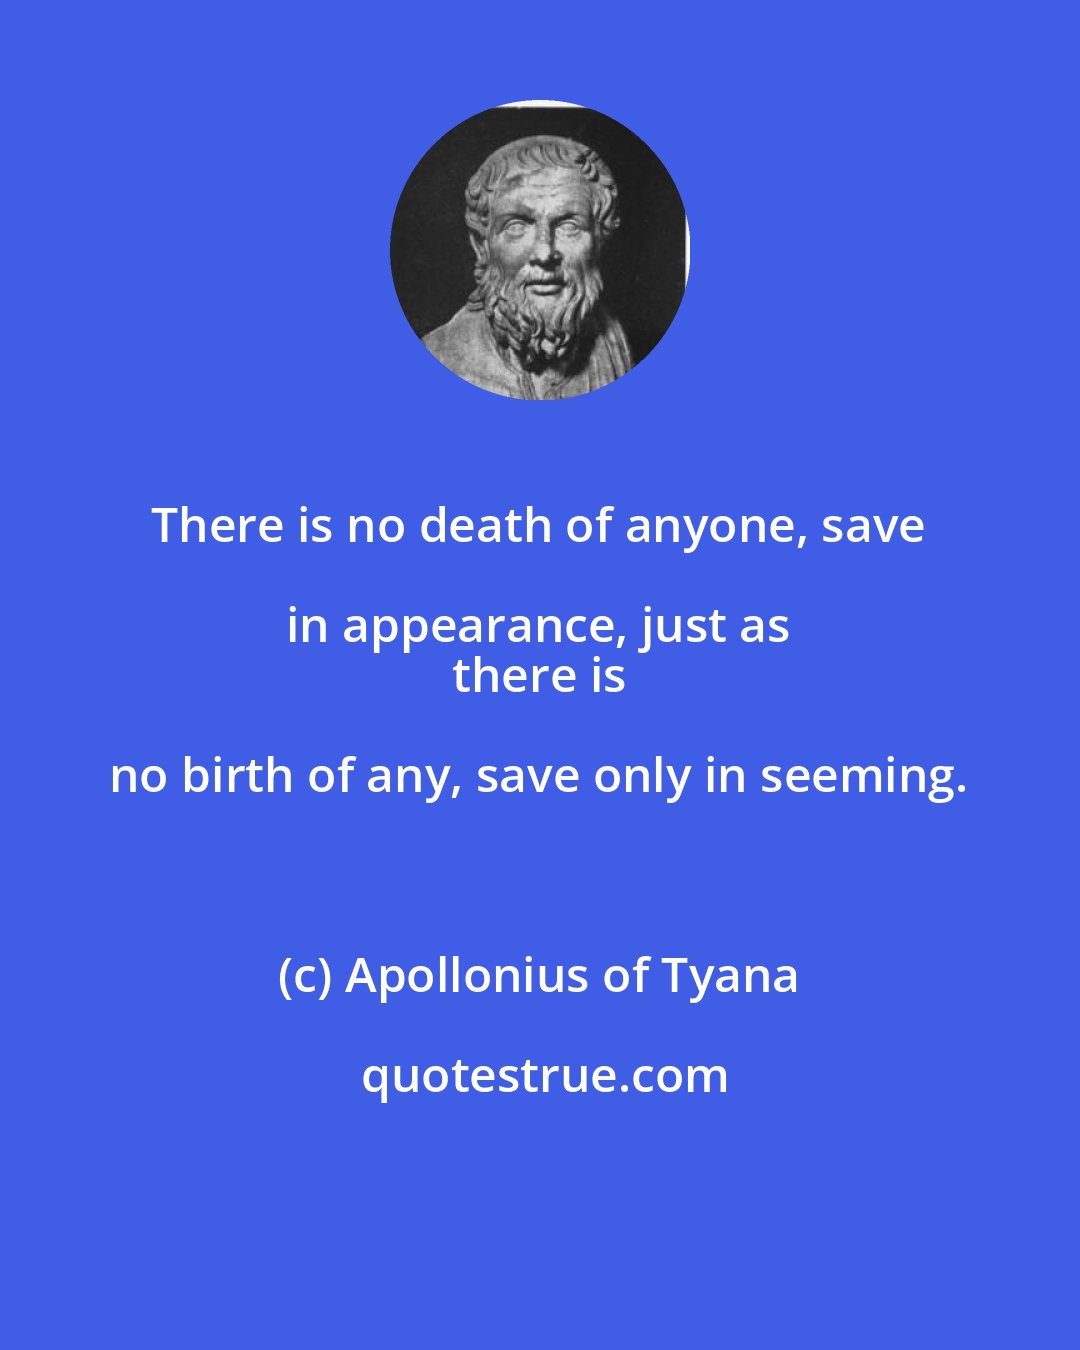 Apollonius of Tyana: There is no death of anyone, save in appearance, just as 
 there is no birth of any, save only in seeming.